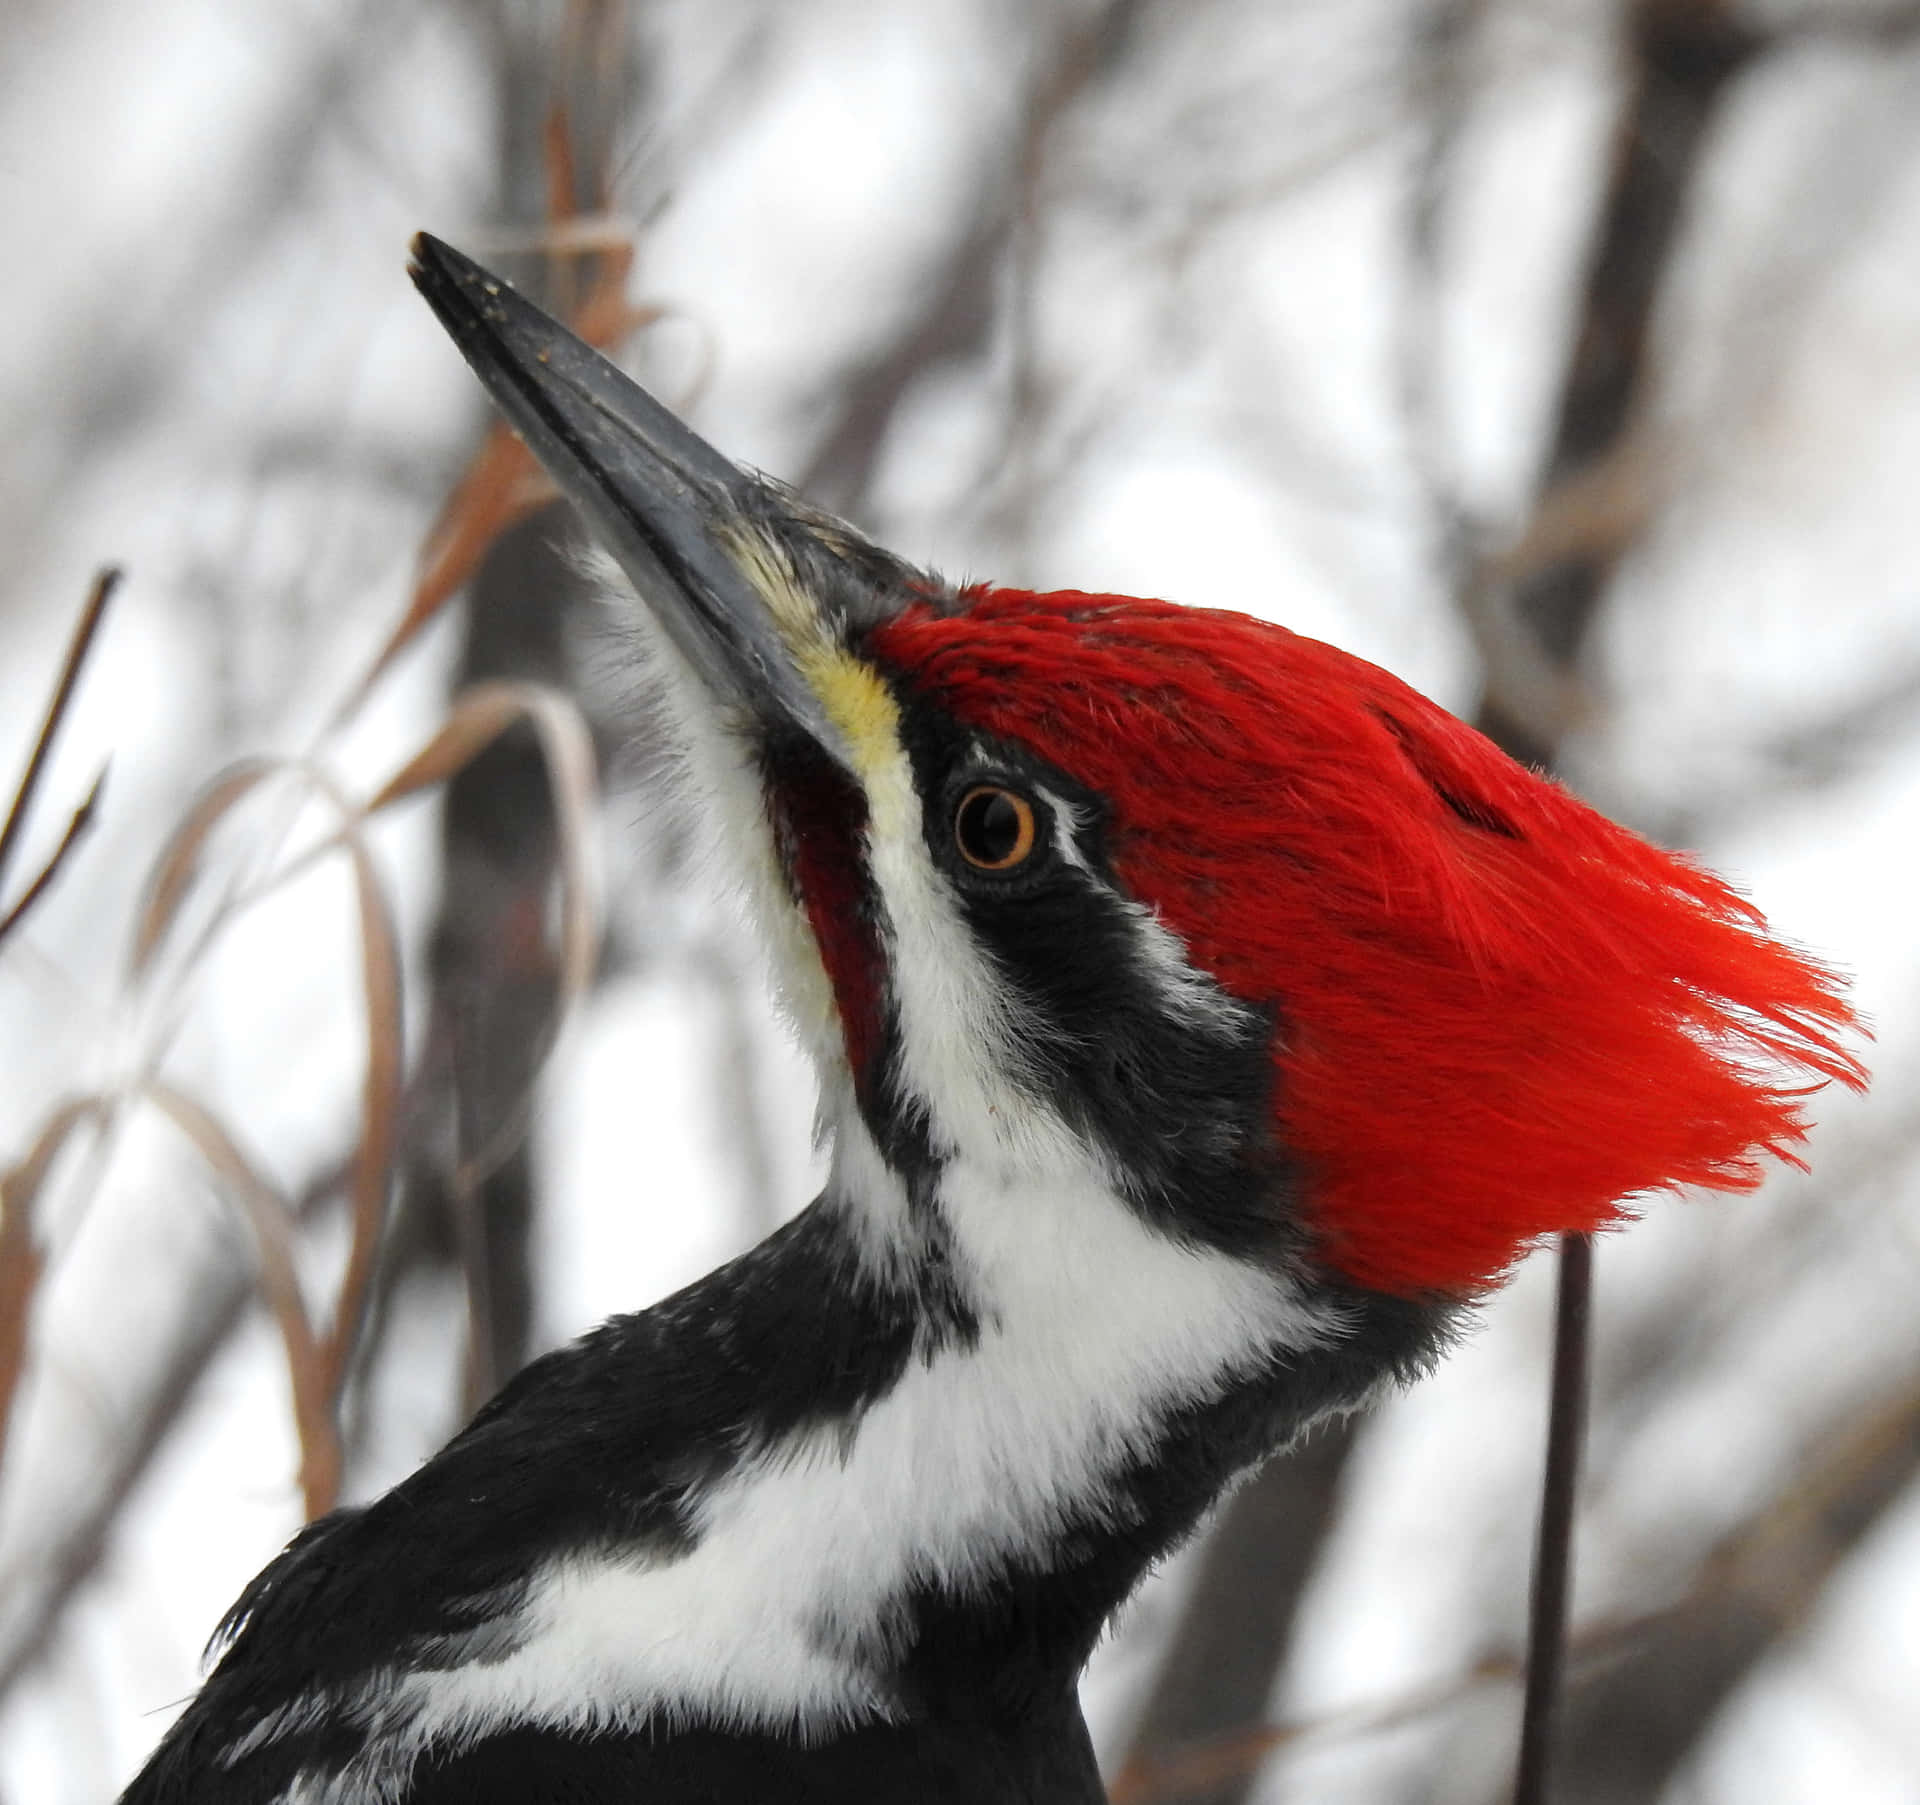 An Up Close Look at a Woodpecker